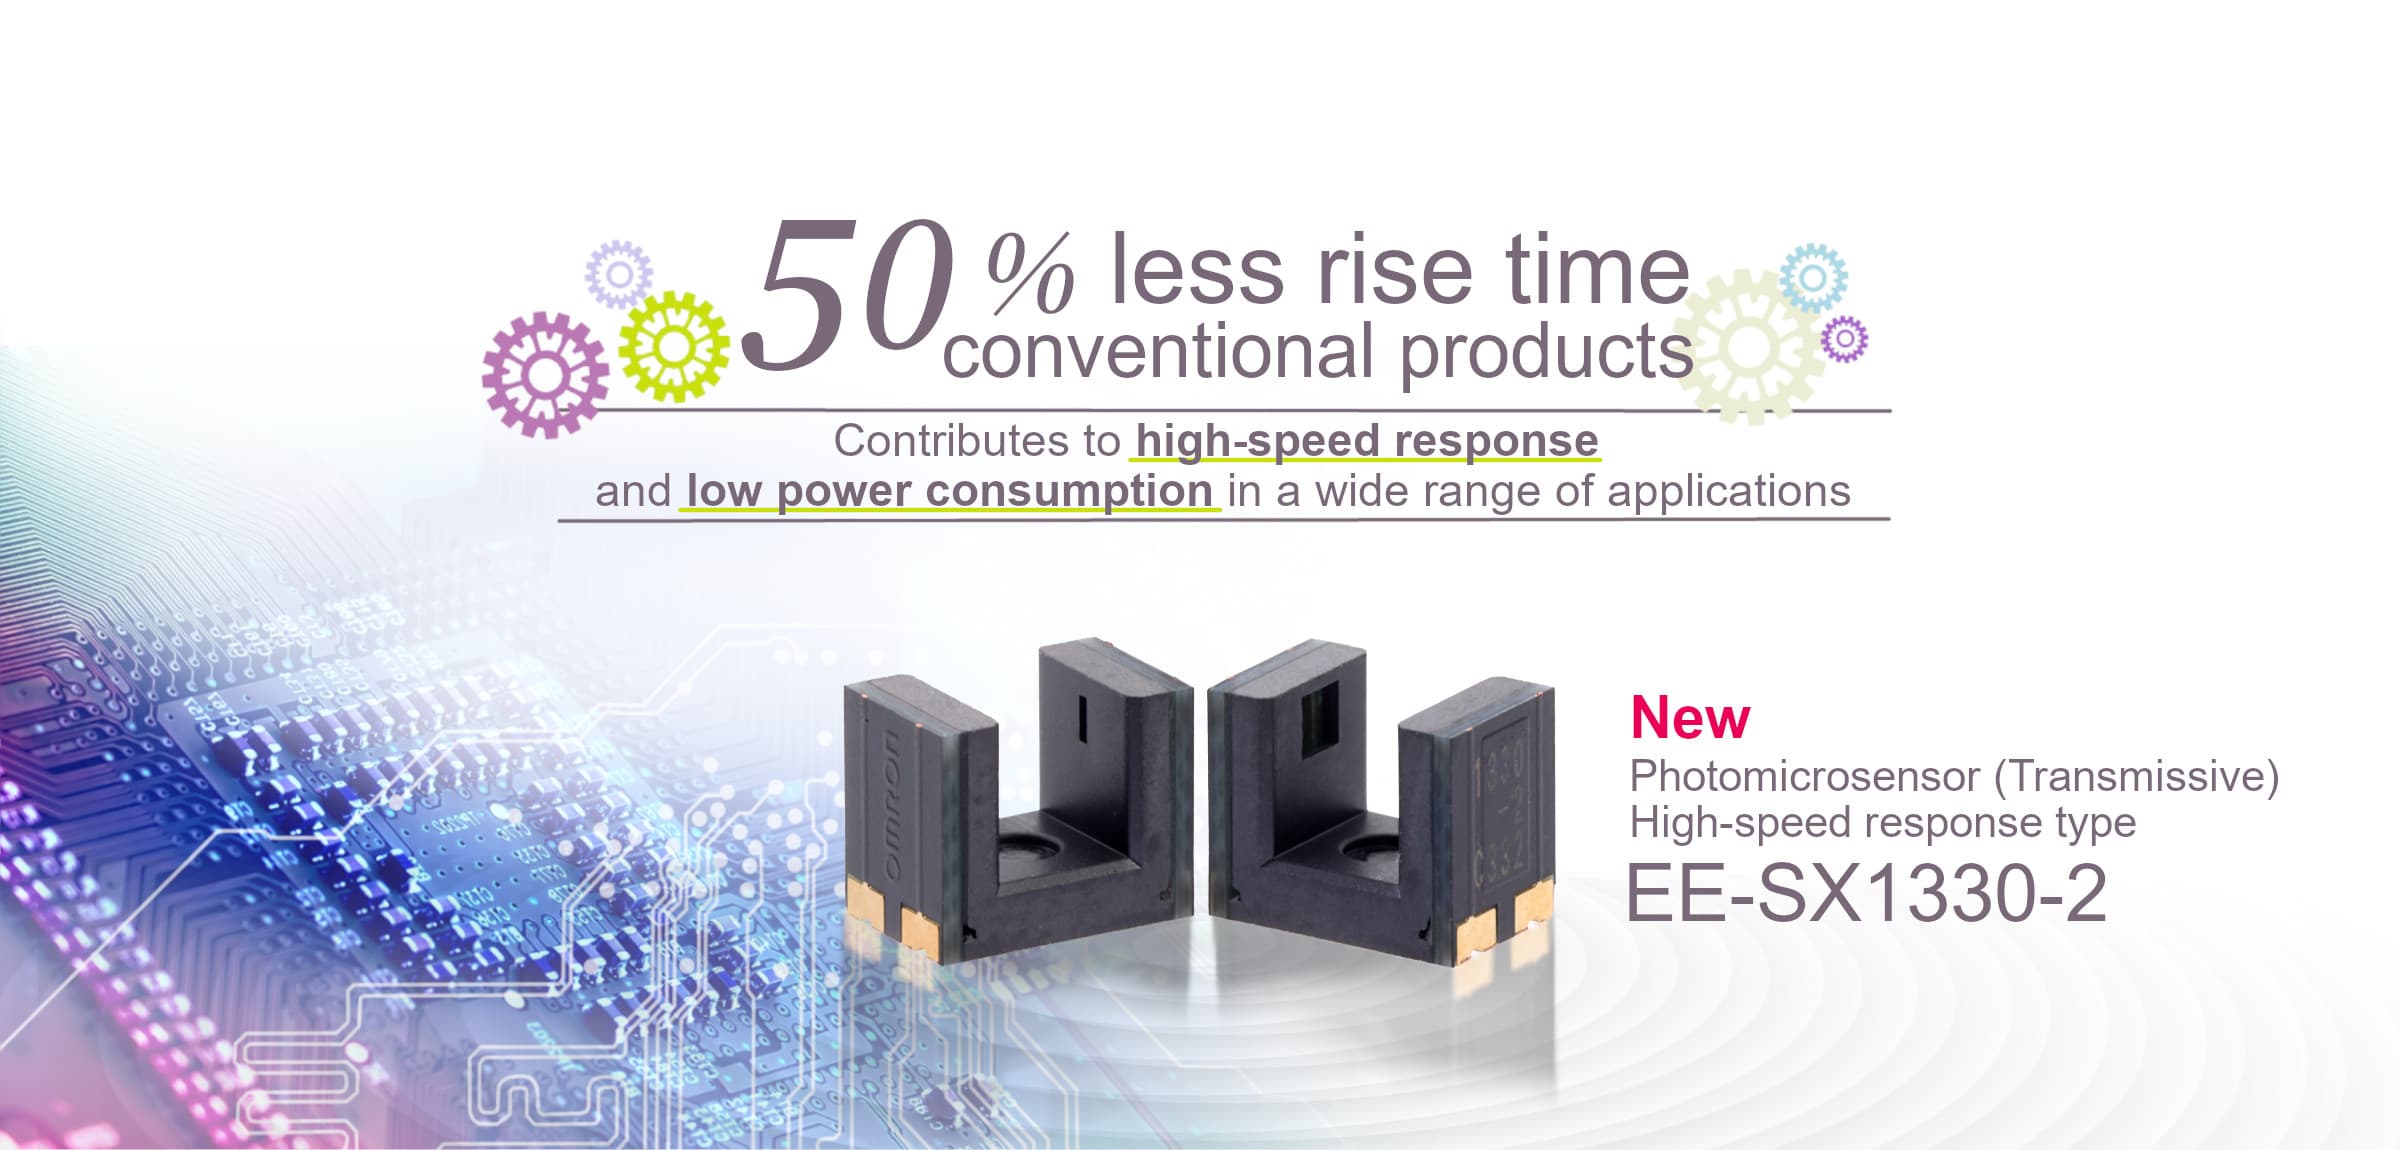 50% less rise time conventional products | Contributes to high-speed response and low power consumption in a wide range of applications | New Photomicrosensor (Transmissive) High-speed response type EE-SX1330-2